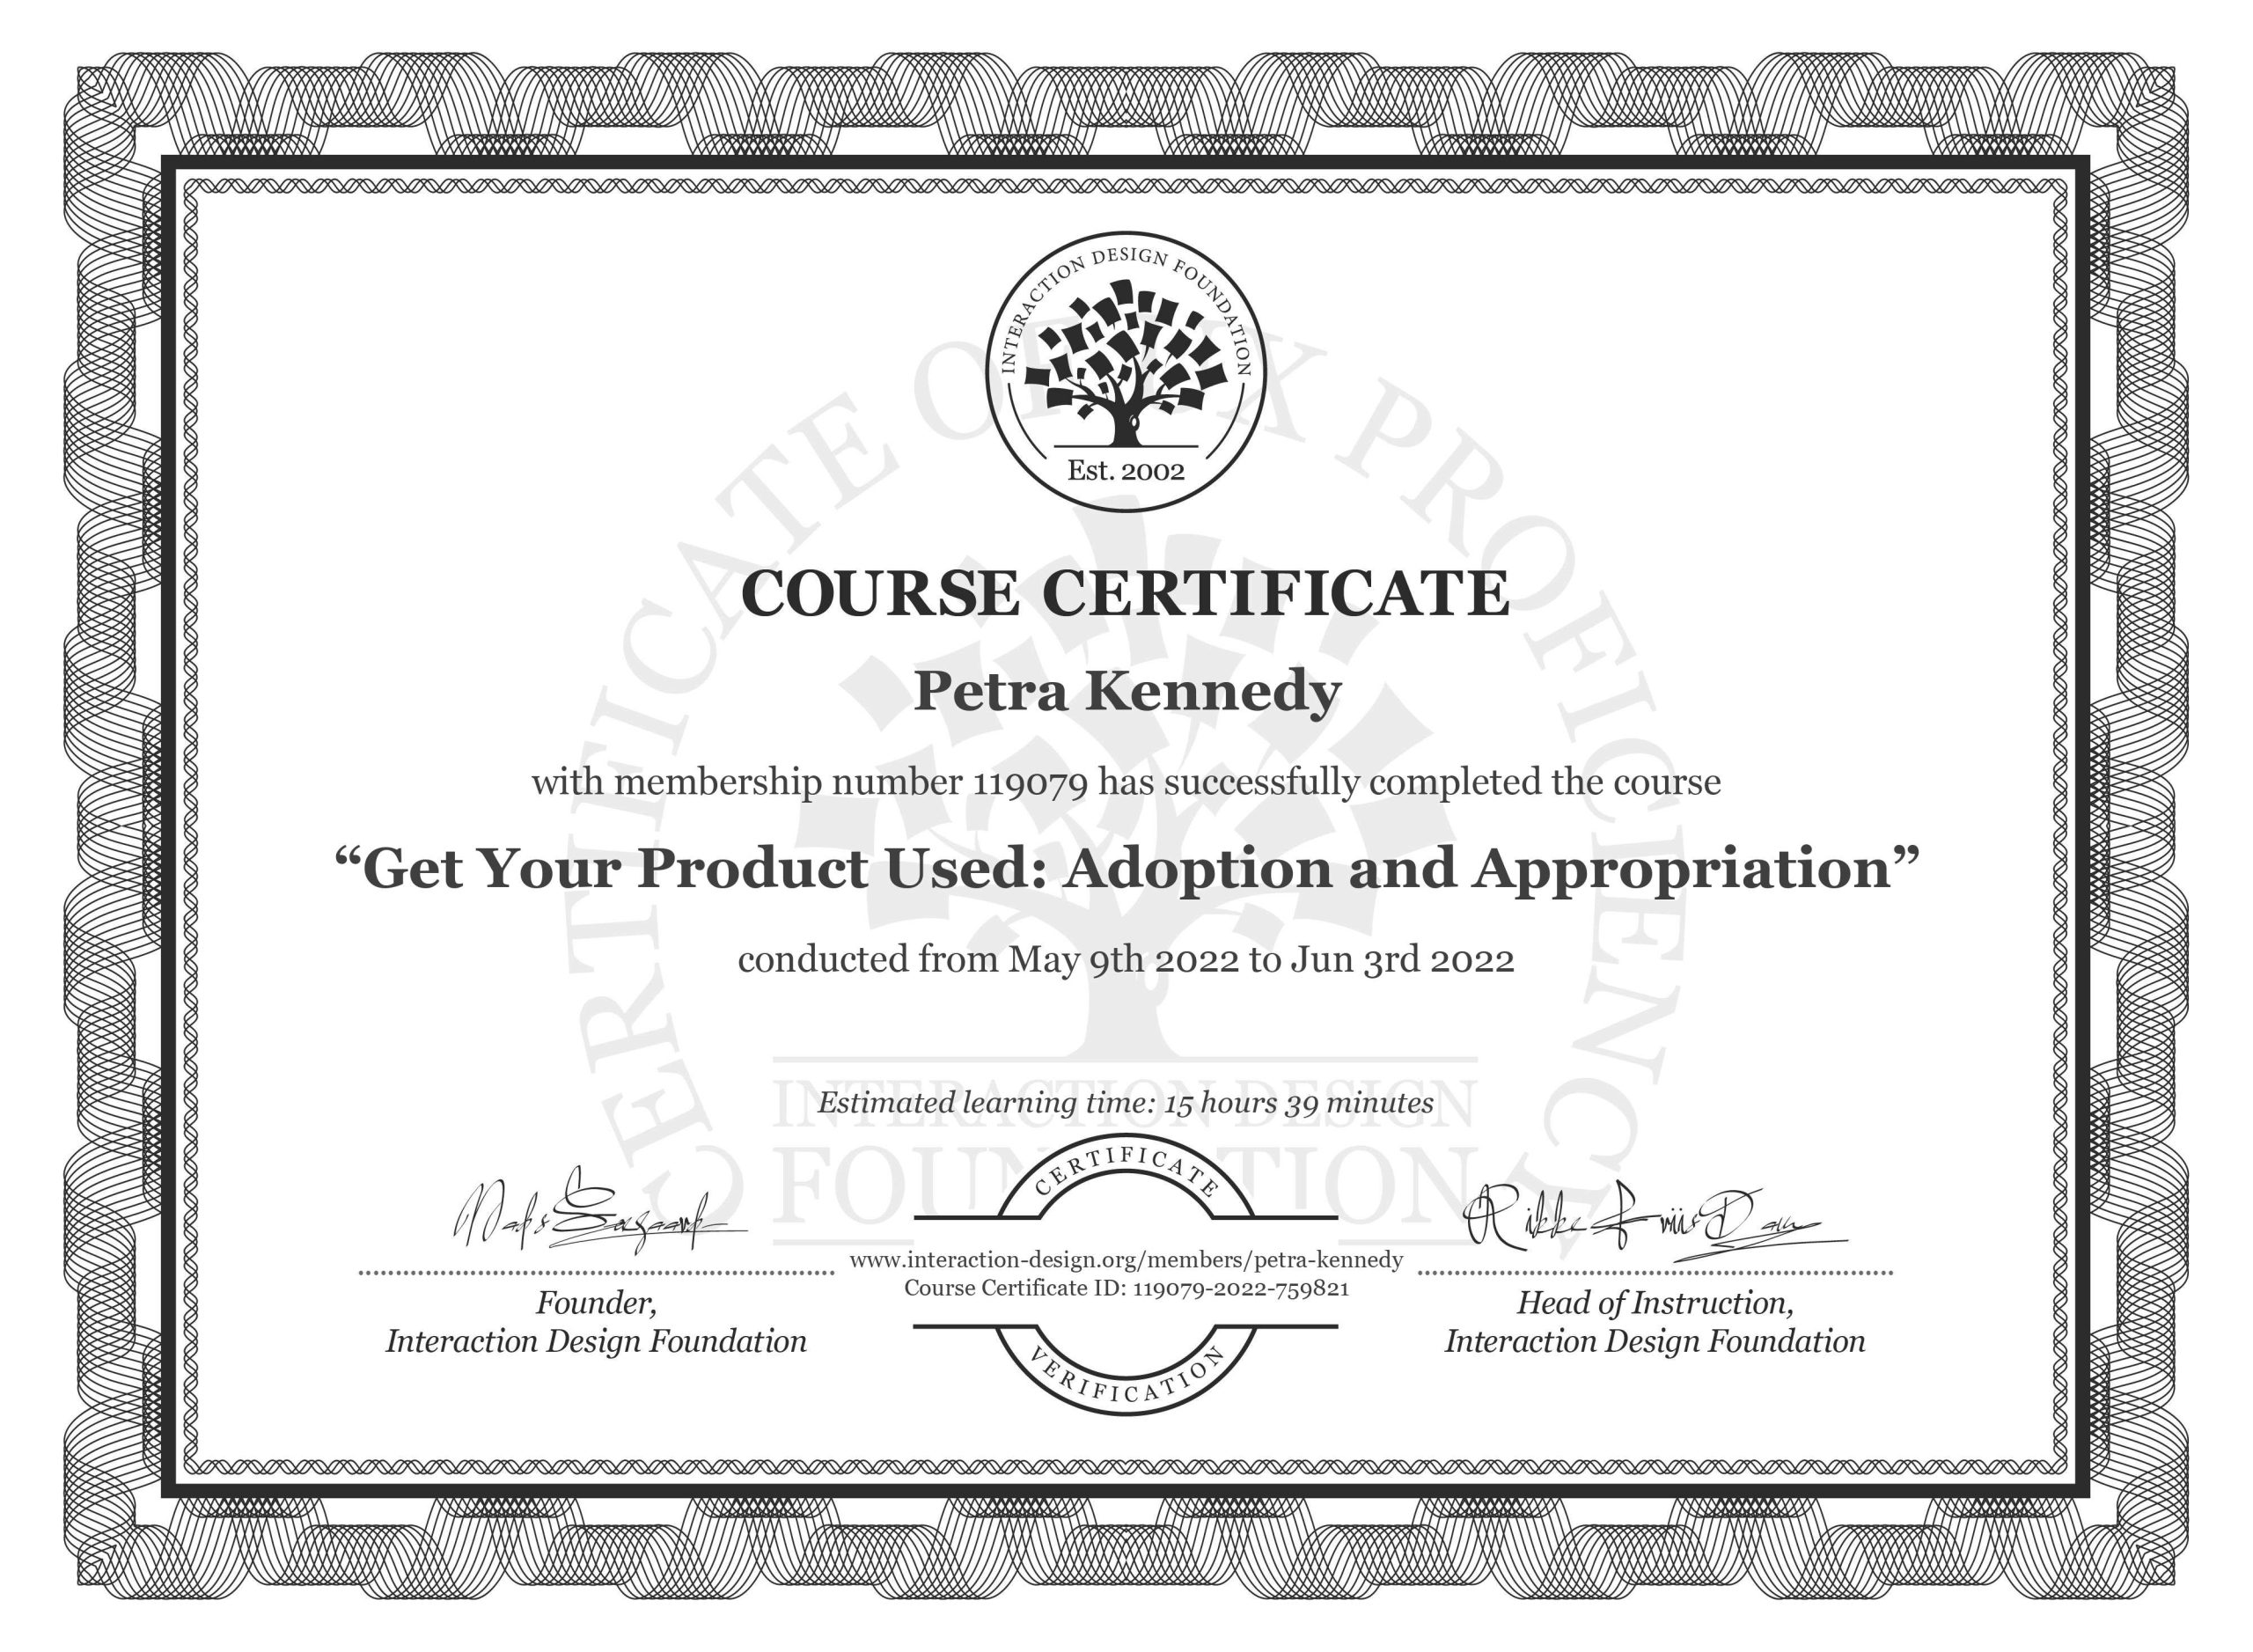 IxDF course certificate Get your product used: Adoption and Appropriation